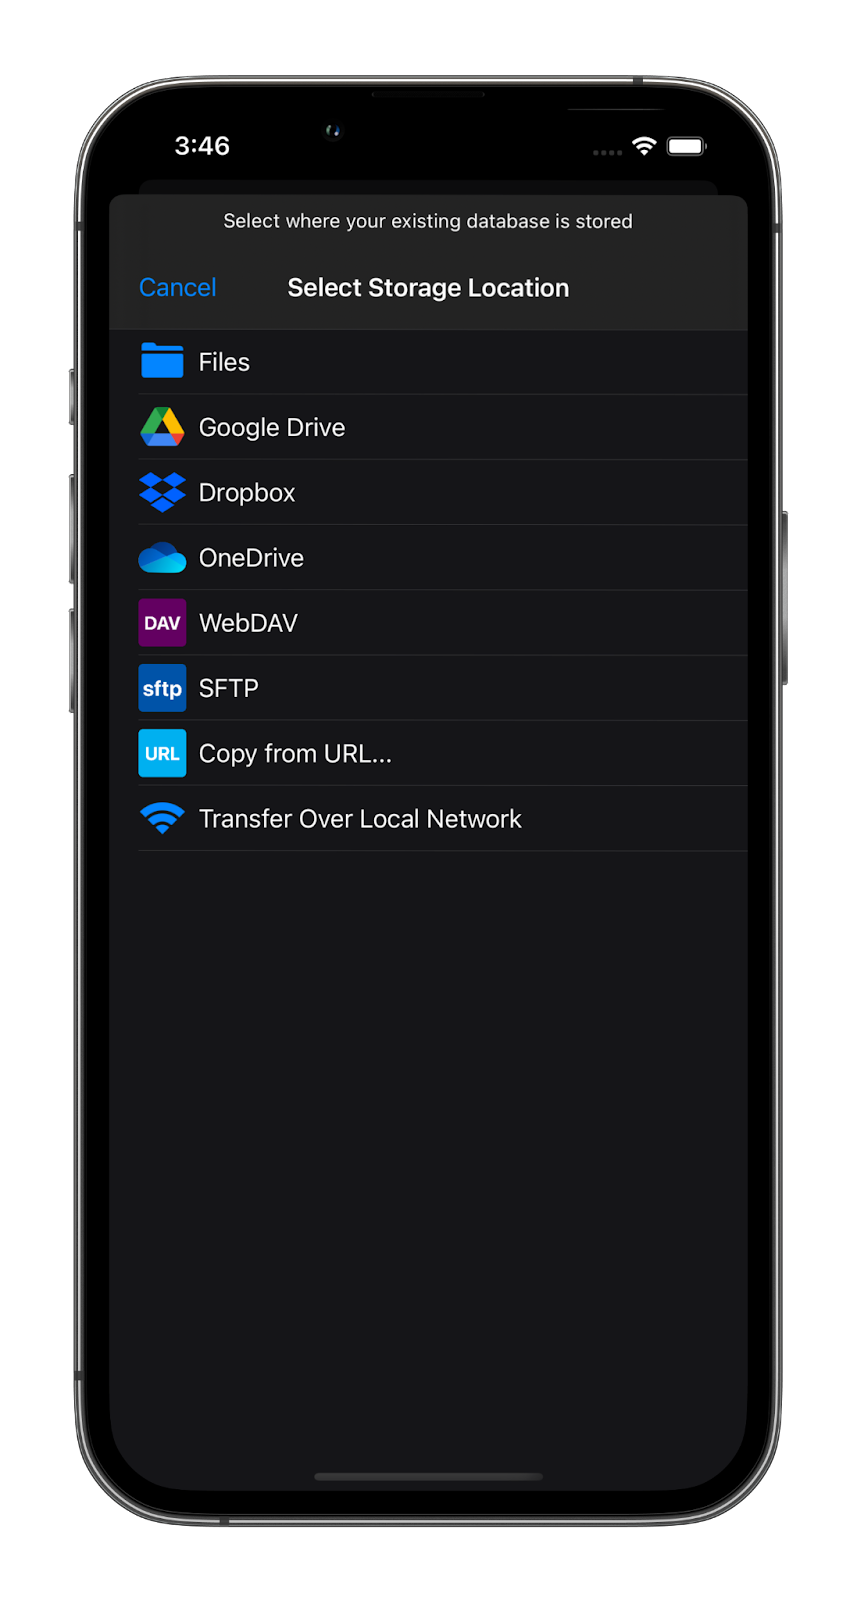 An iPhone showing a list of different database storage locations, including Google Drive, Dropbox, etc.